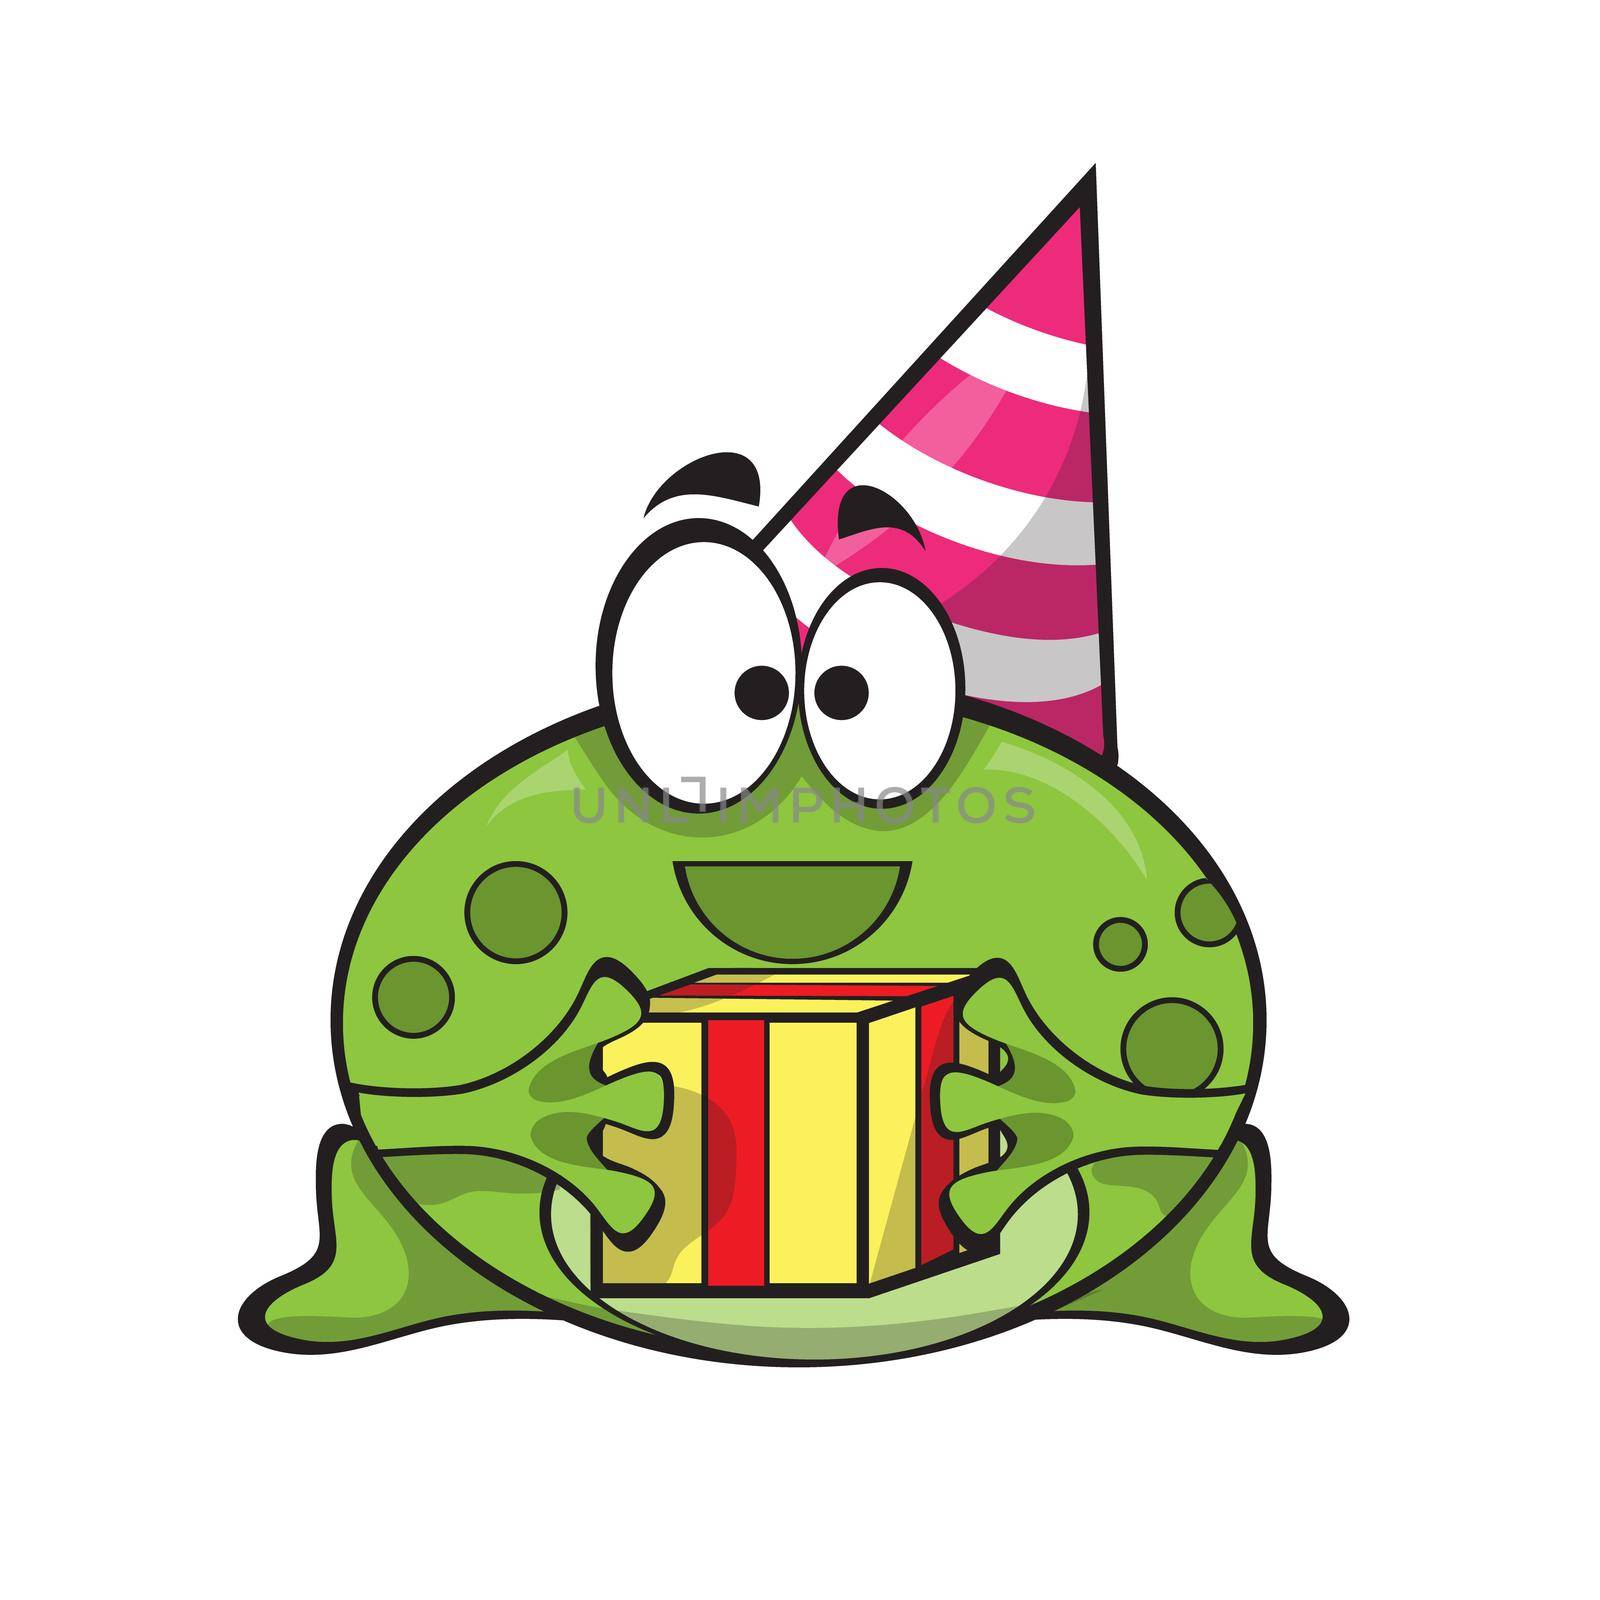 Funny cute birthday card with baby frog wearing party hat, cute smiling happy animal for children. Vector kids cartoon illustration.